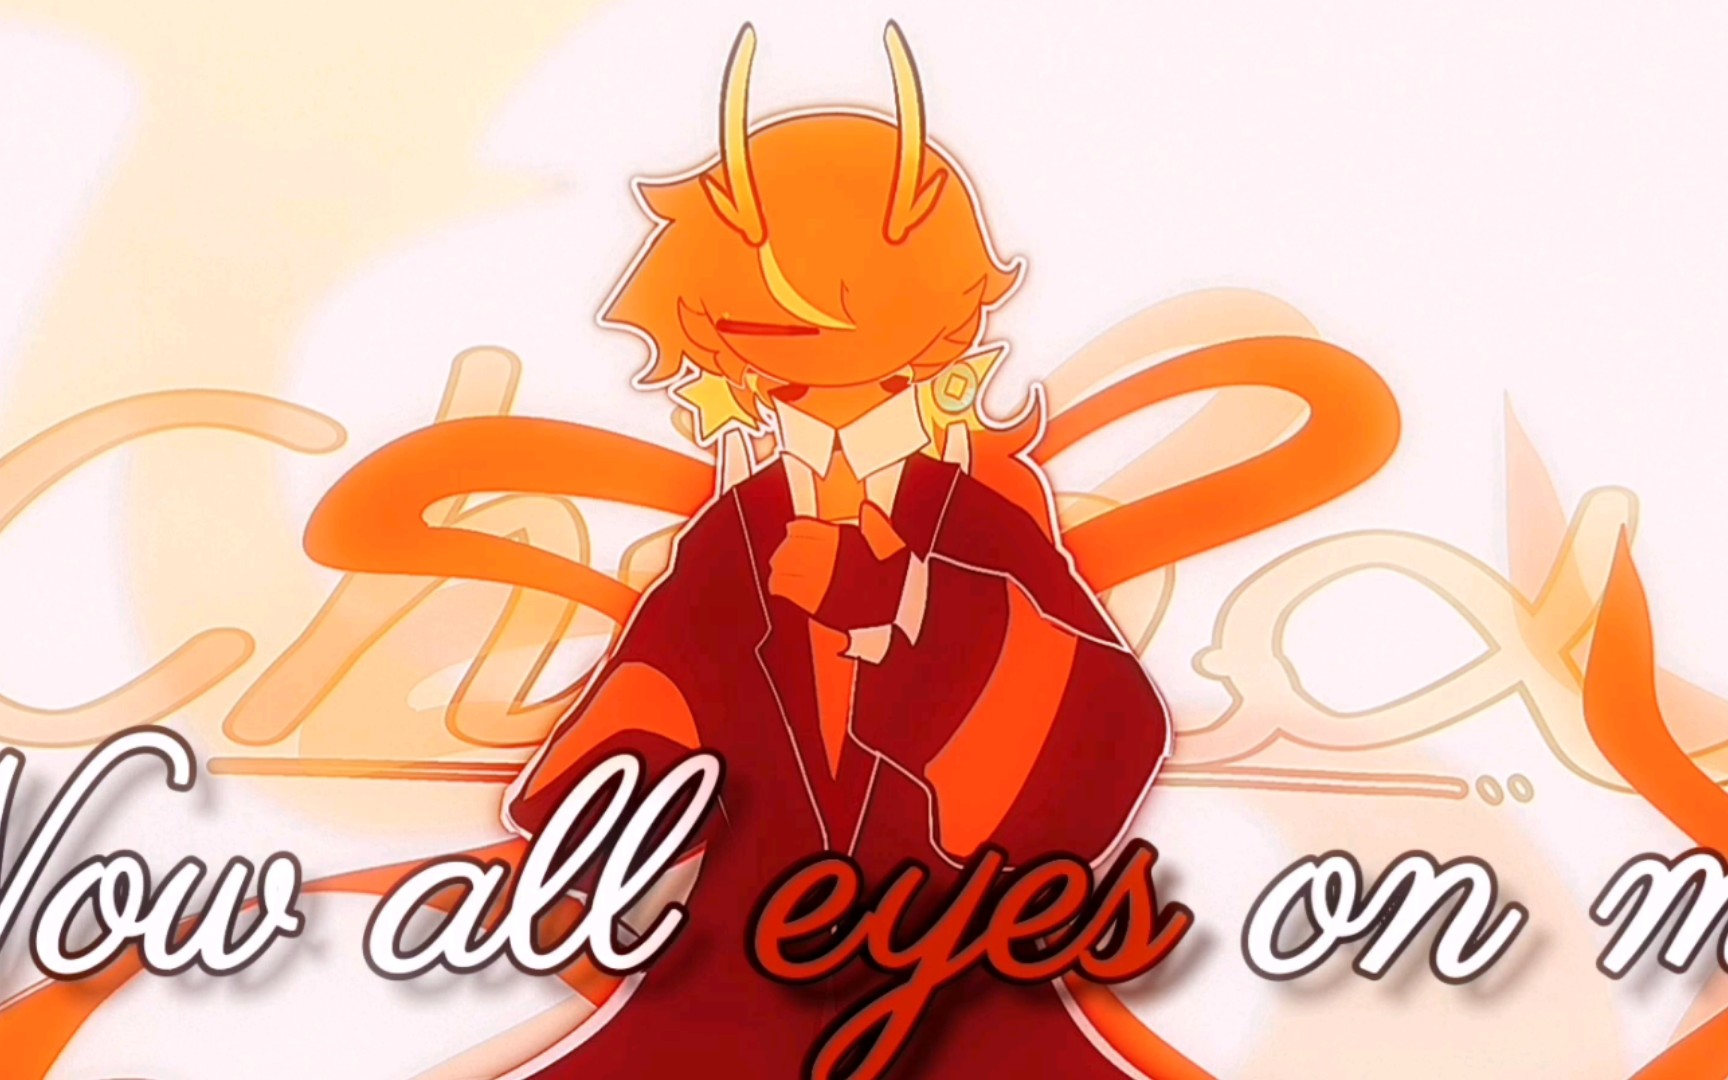 【CH 手书 主瓷】All Eyes On Me